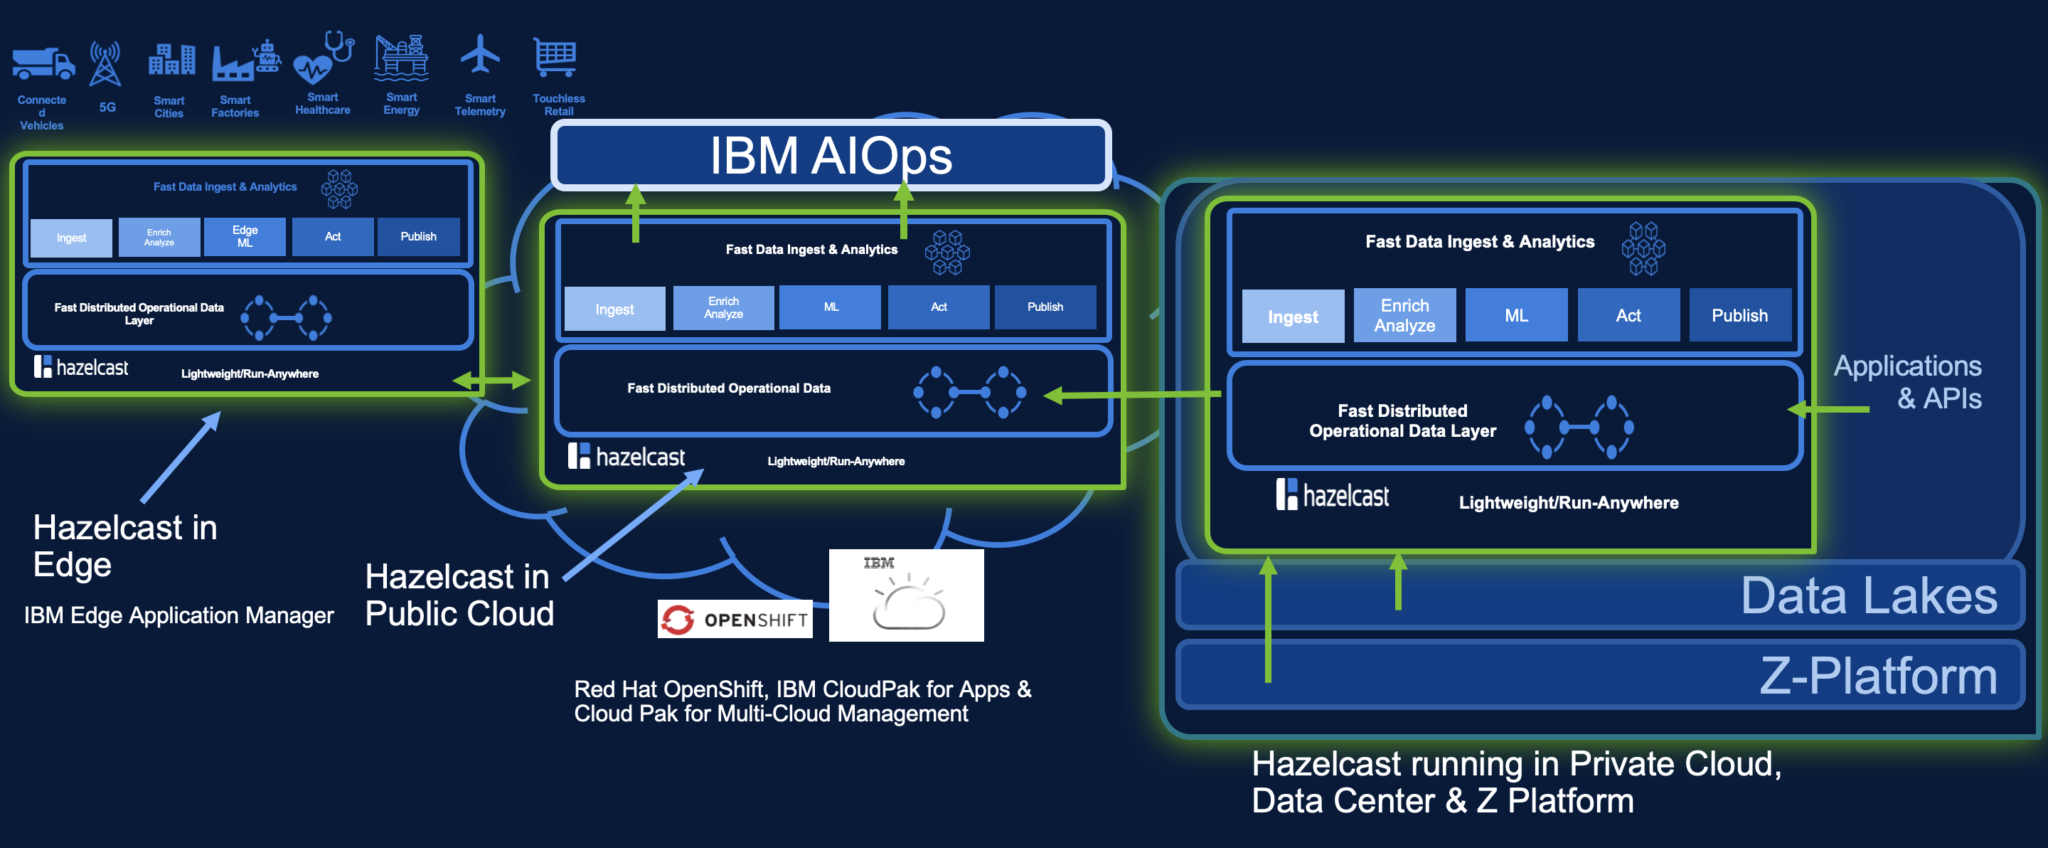 Hazelcast and IBM for AIOps